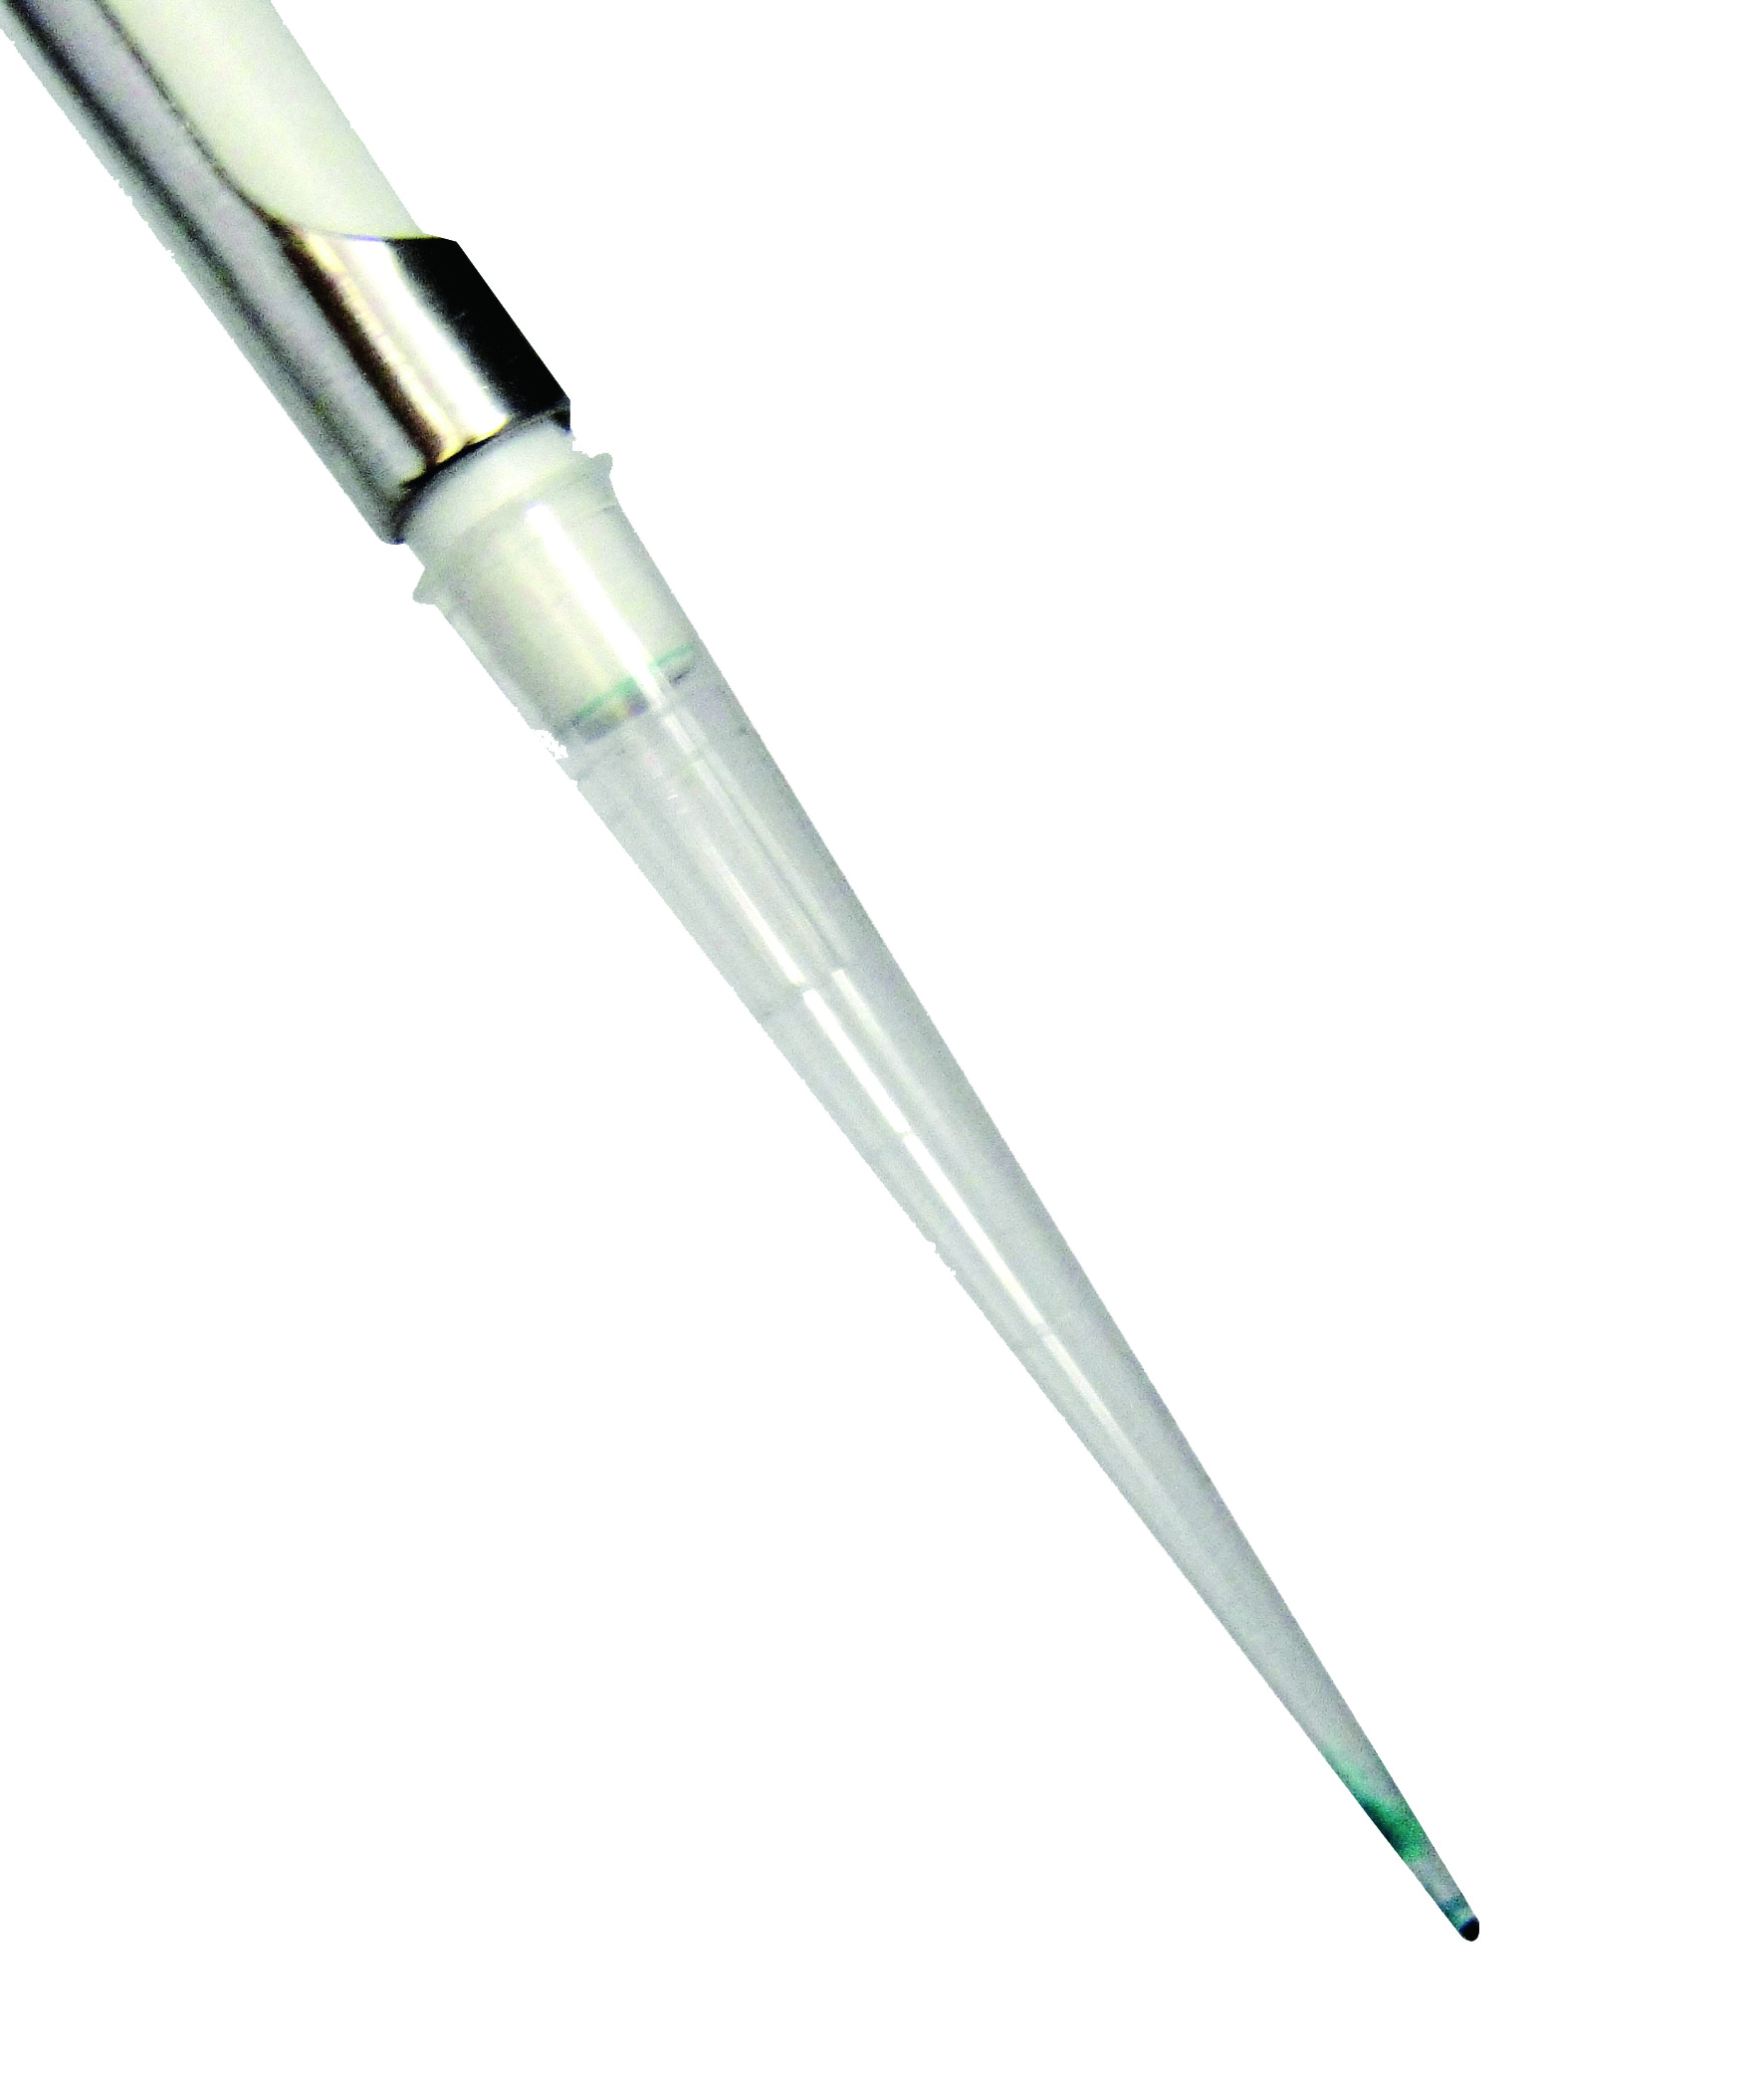 NADE Laboratory Low Binding Pipette Filter Tips ND5031-L transparent with scale 0.1-10ul 4800pcs/CARTON